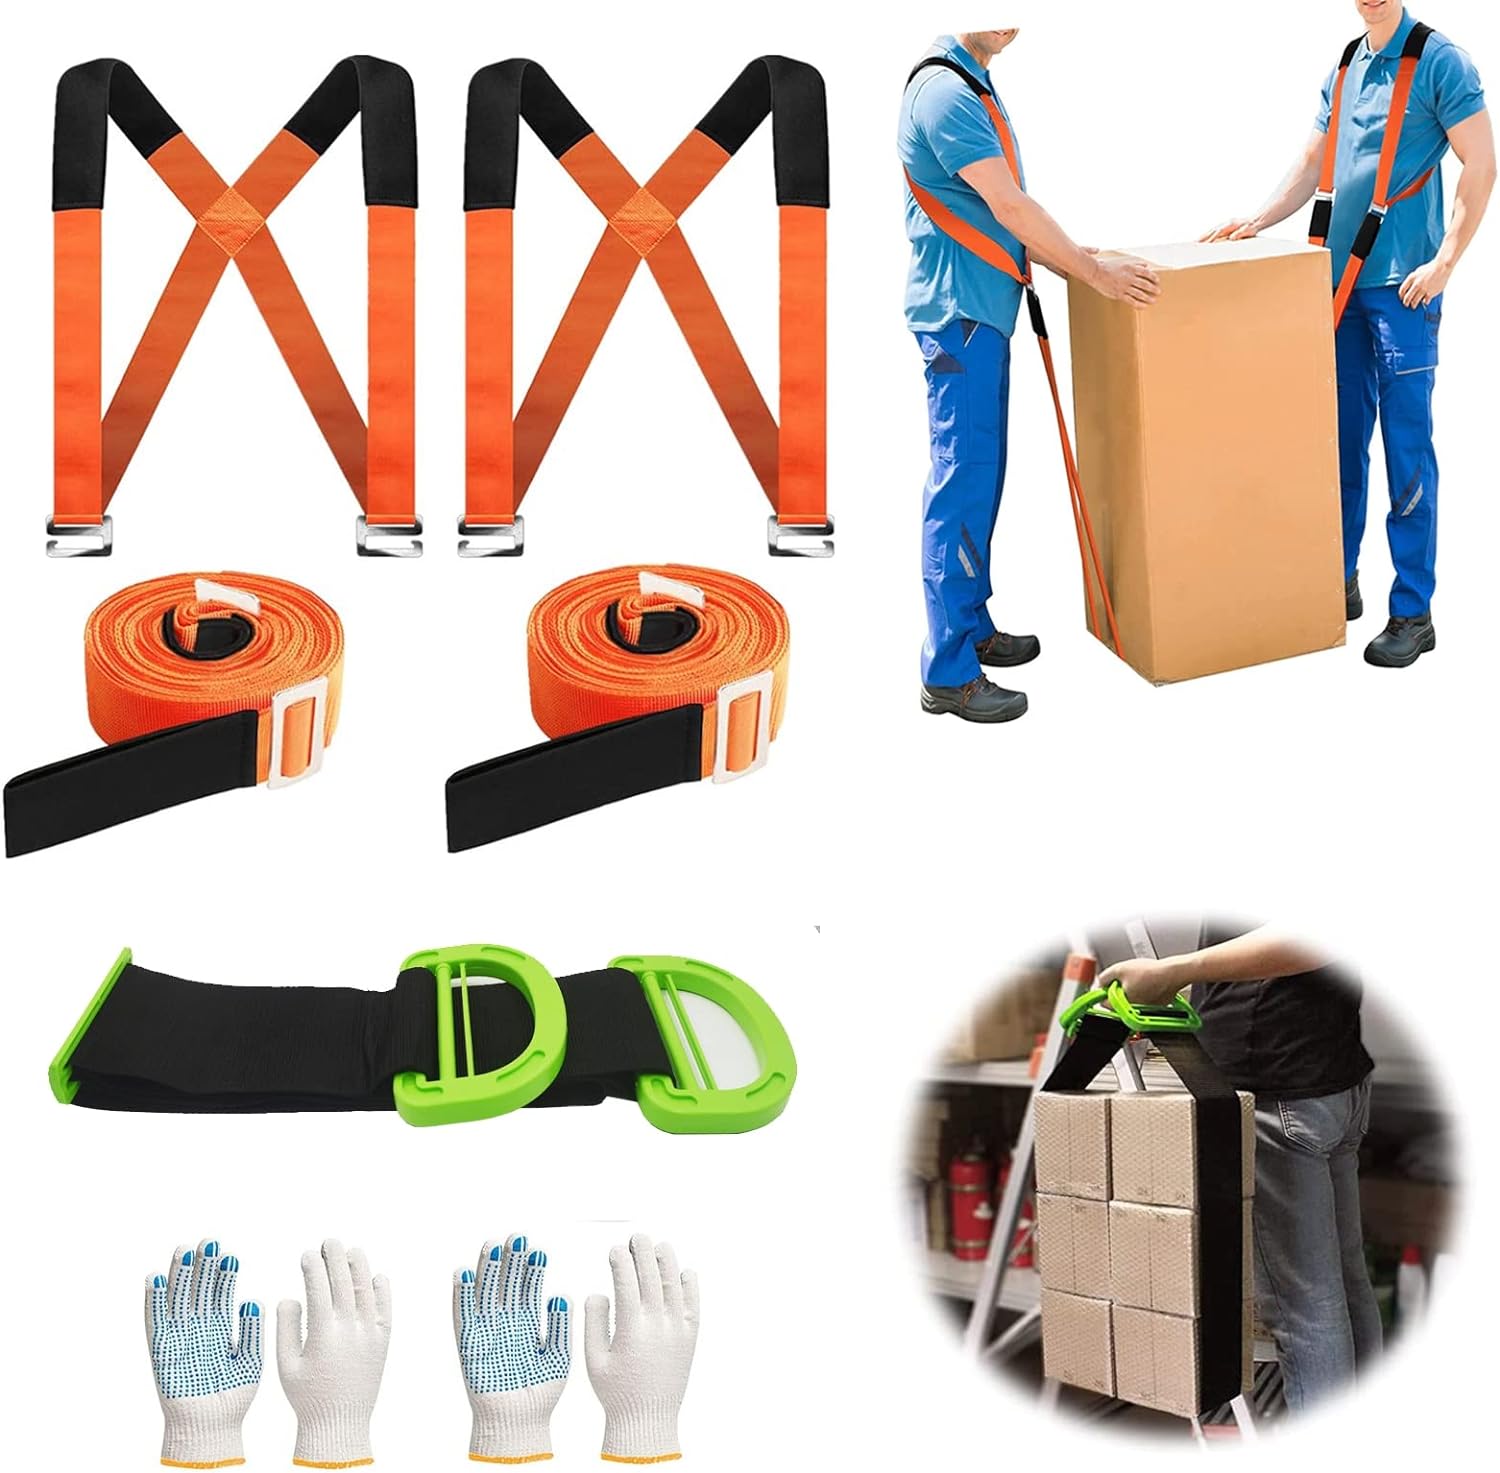 Heavy Big Items Lifting Moving Straps Harnesses Furniture Cargo Movers Aid New 